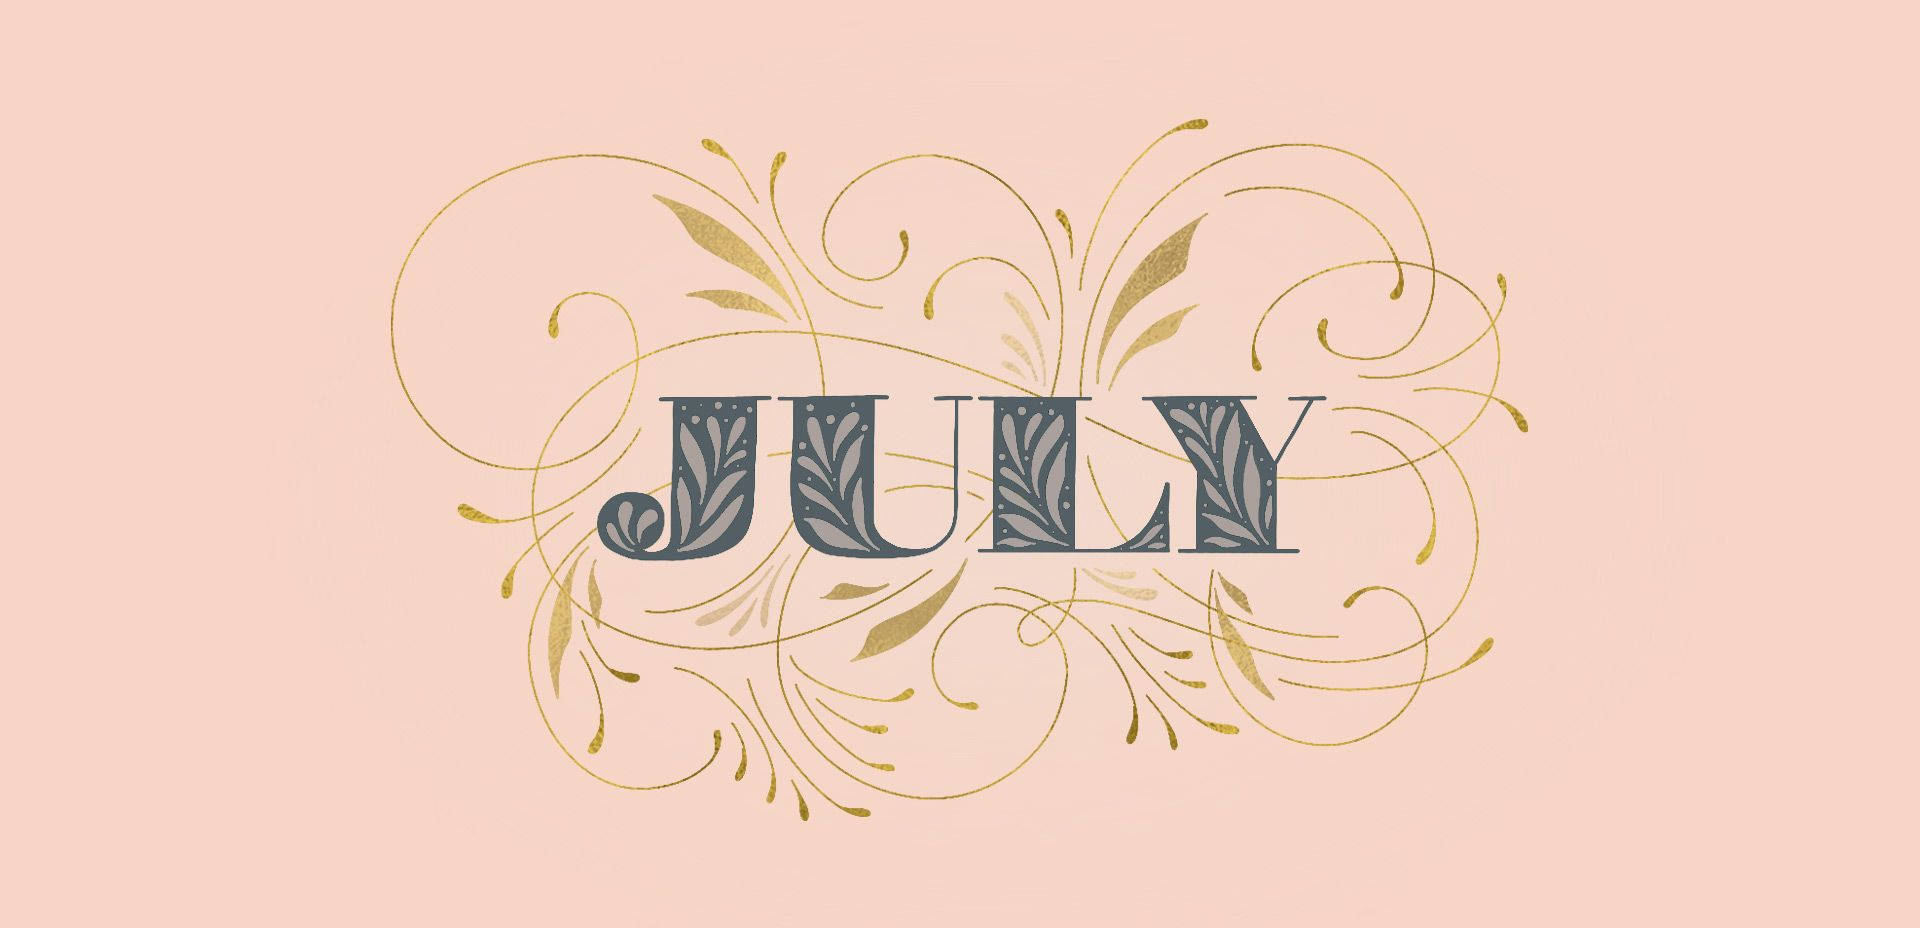 July Is Full Of Vibrant Colors And Beautiful Surprises. Background